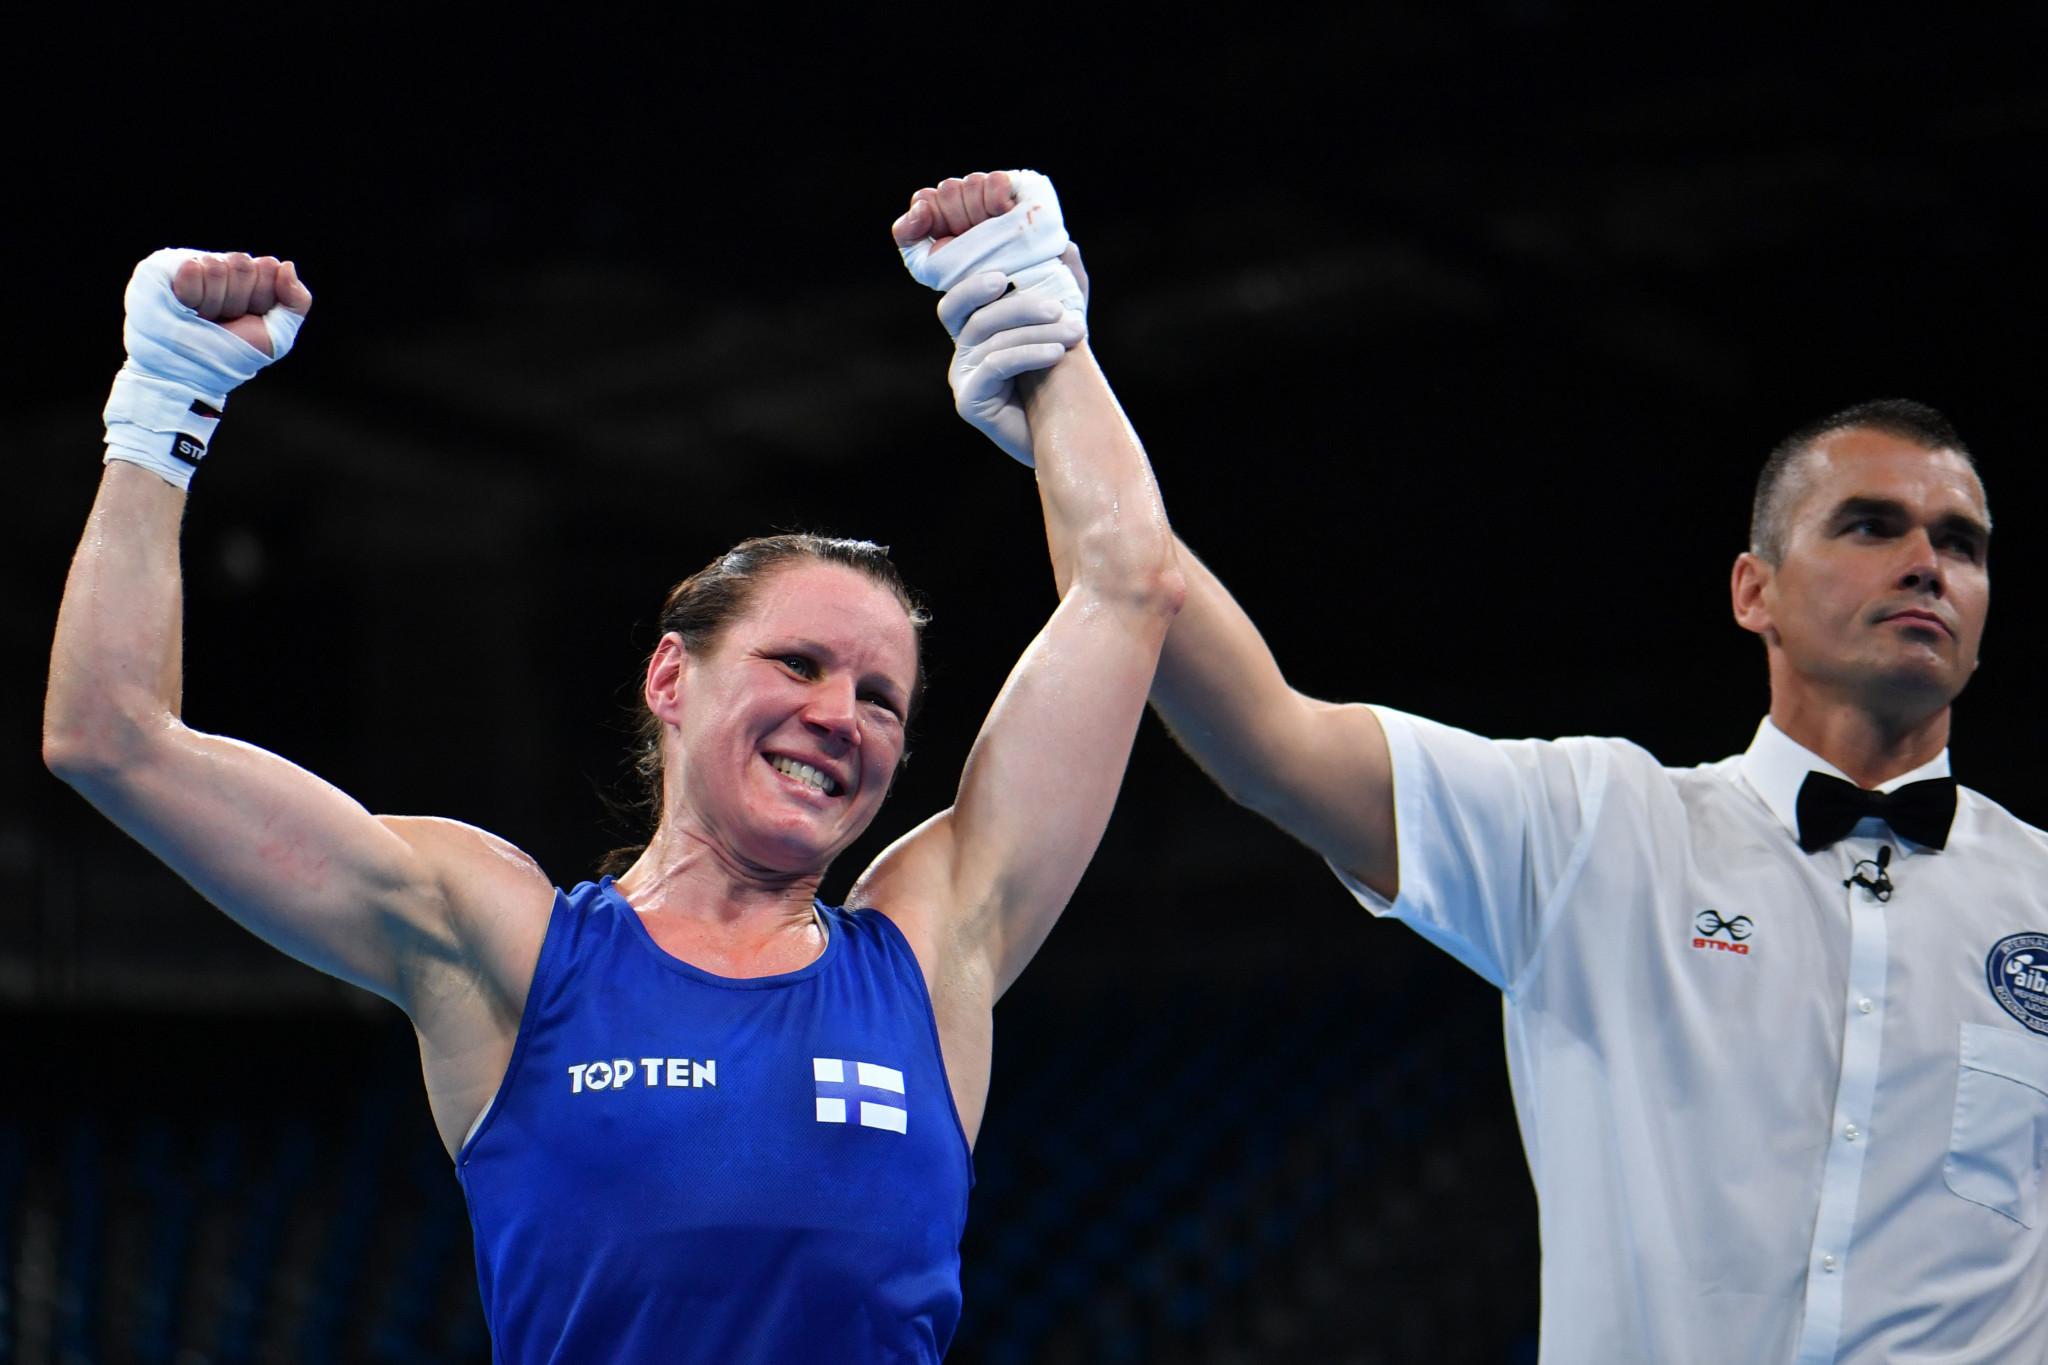 Finland's Mira Potkonen claimed gold in the women's 60kg lightweight competition ©Getty Images